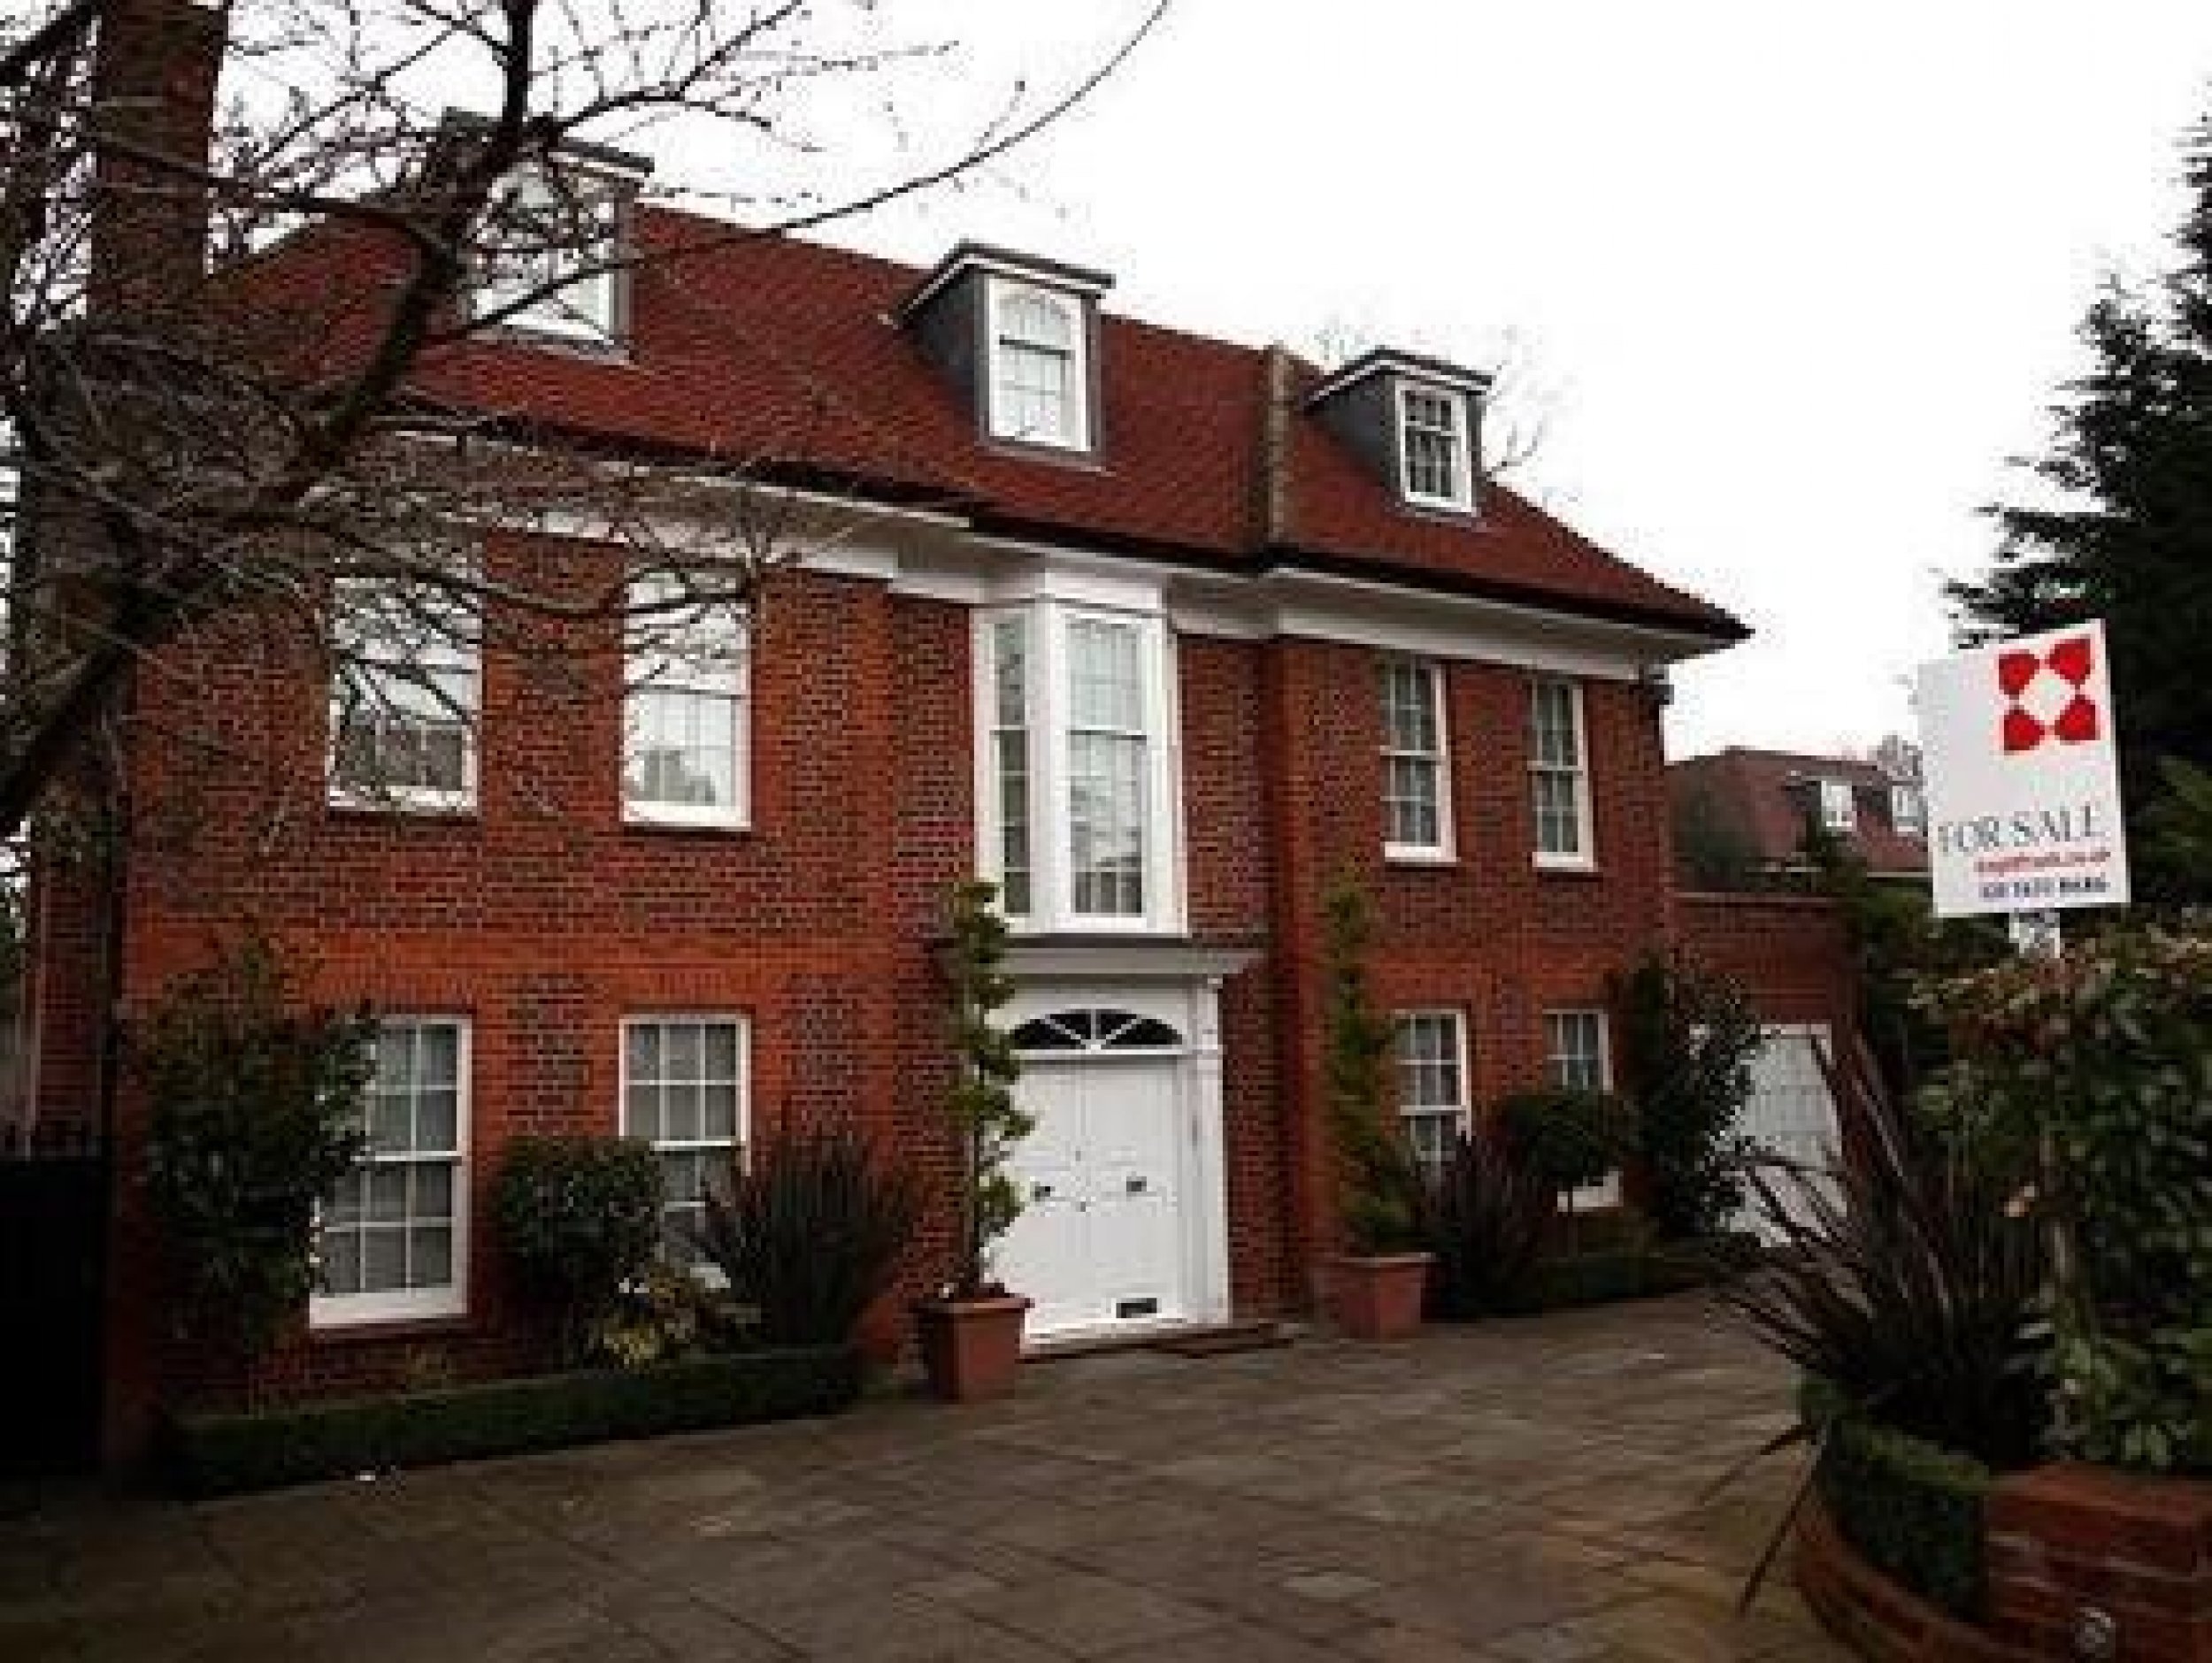 London mansion owned by Gaddafi